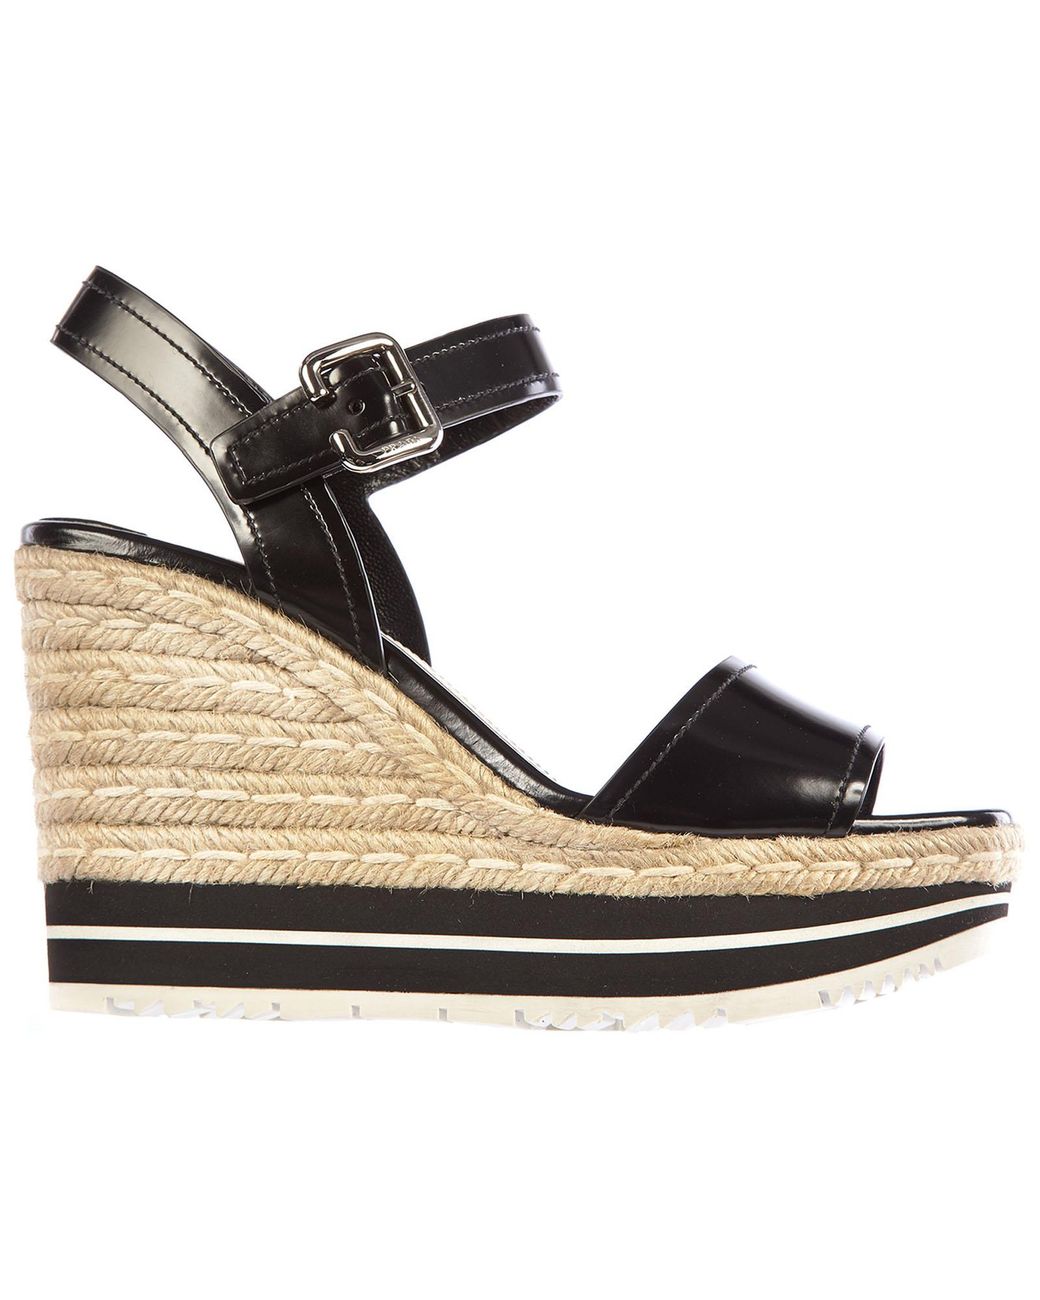 Prada Leather Shoes Wedges Sandals Corda in Black | Lyst